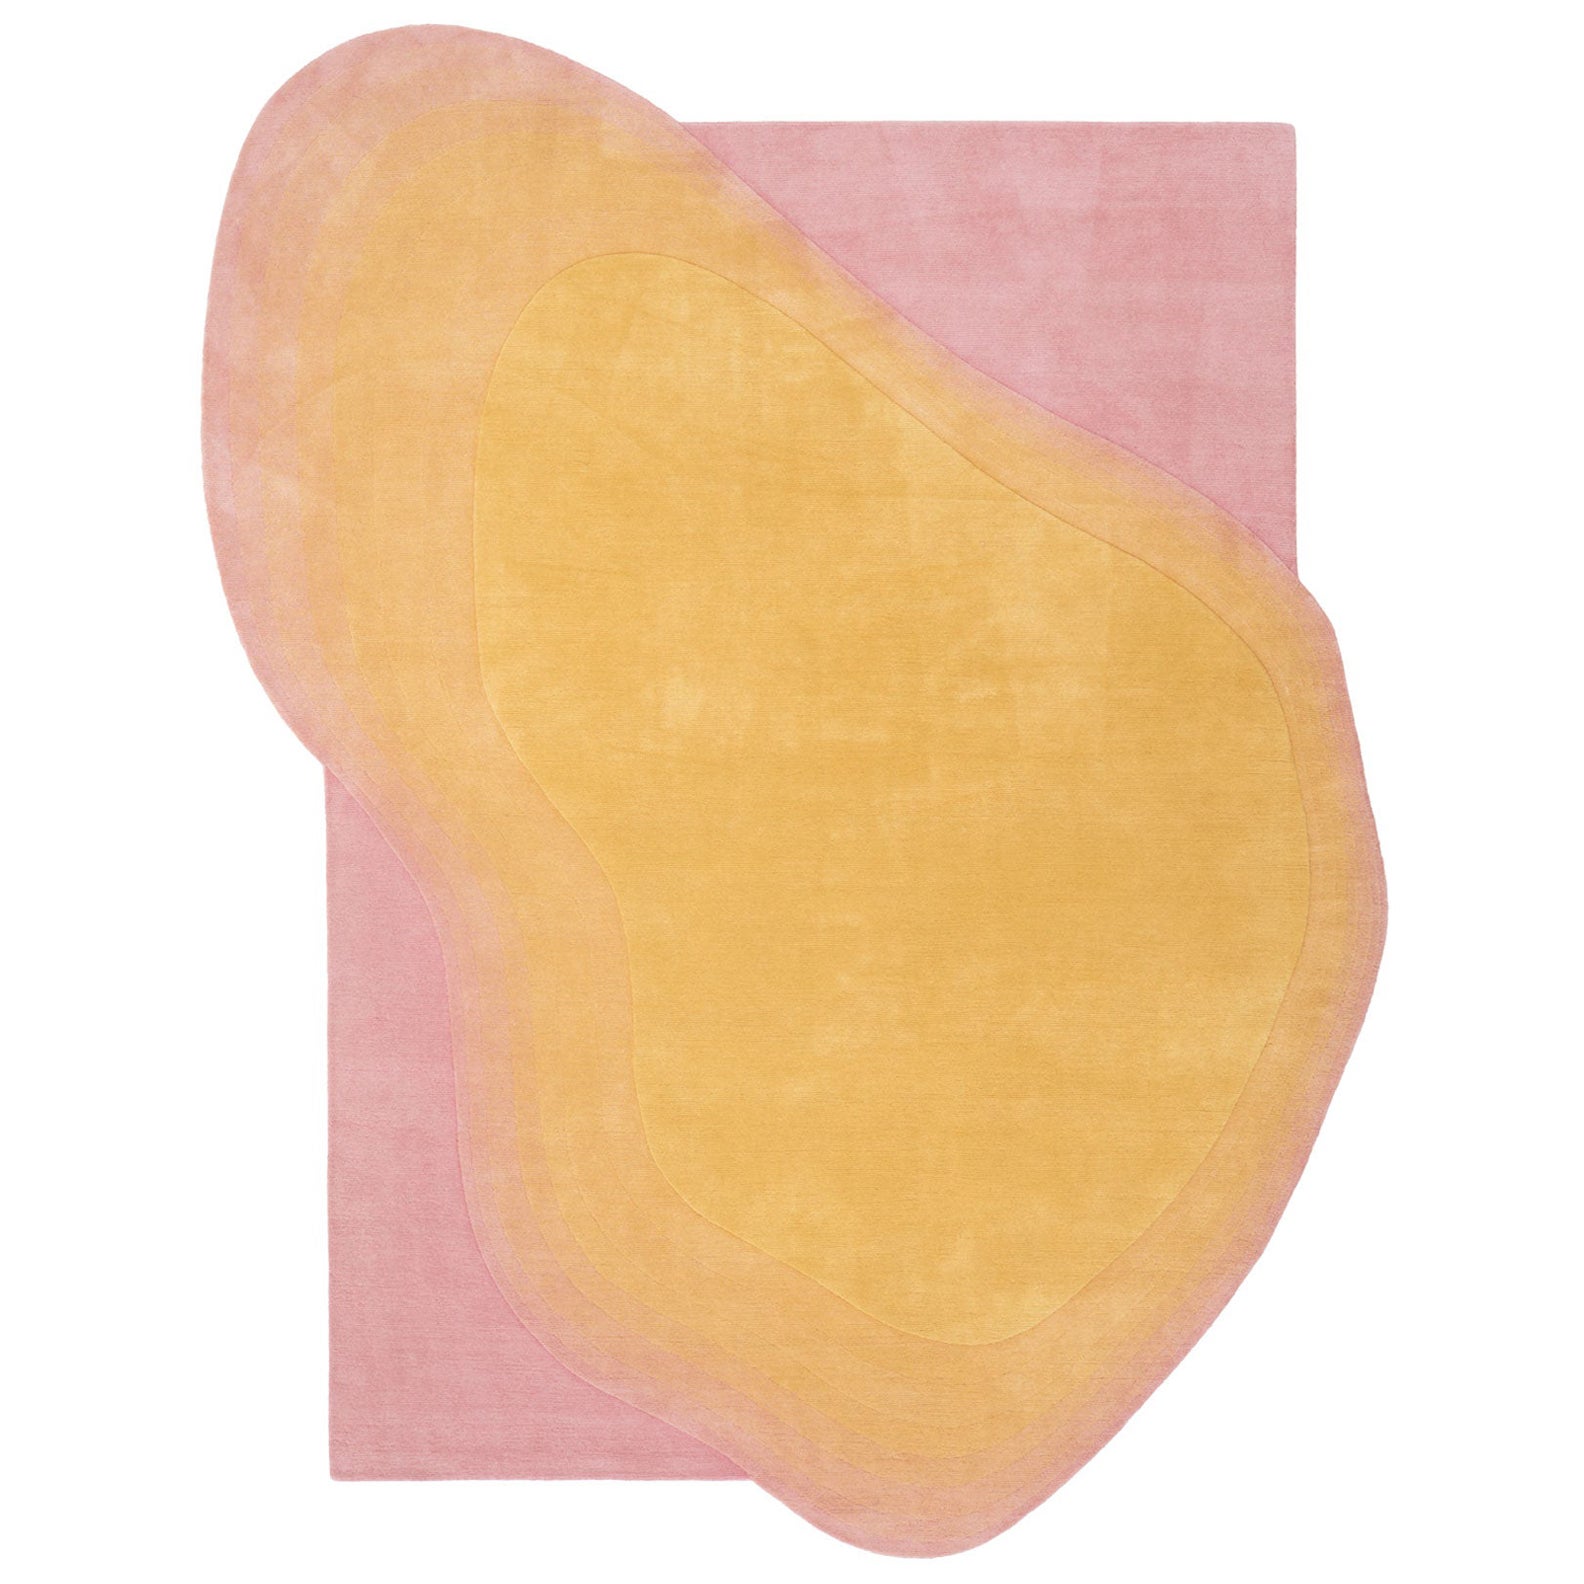 cc-tapis Chroma Spill Yellow Pink Round Rug by Germans Ermičs For Sale